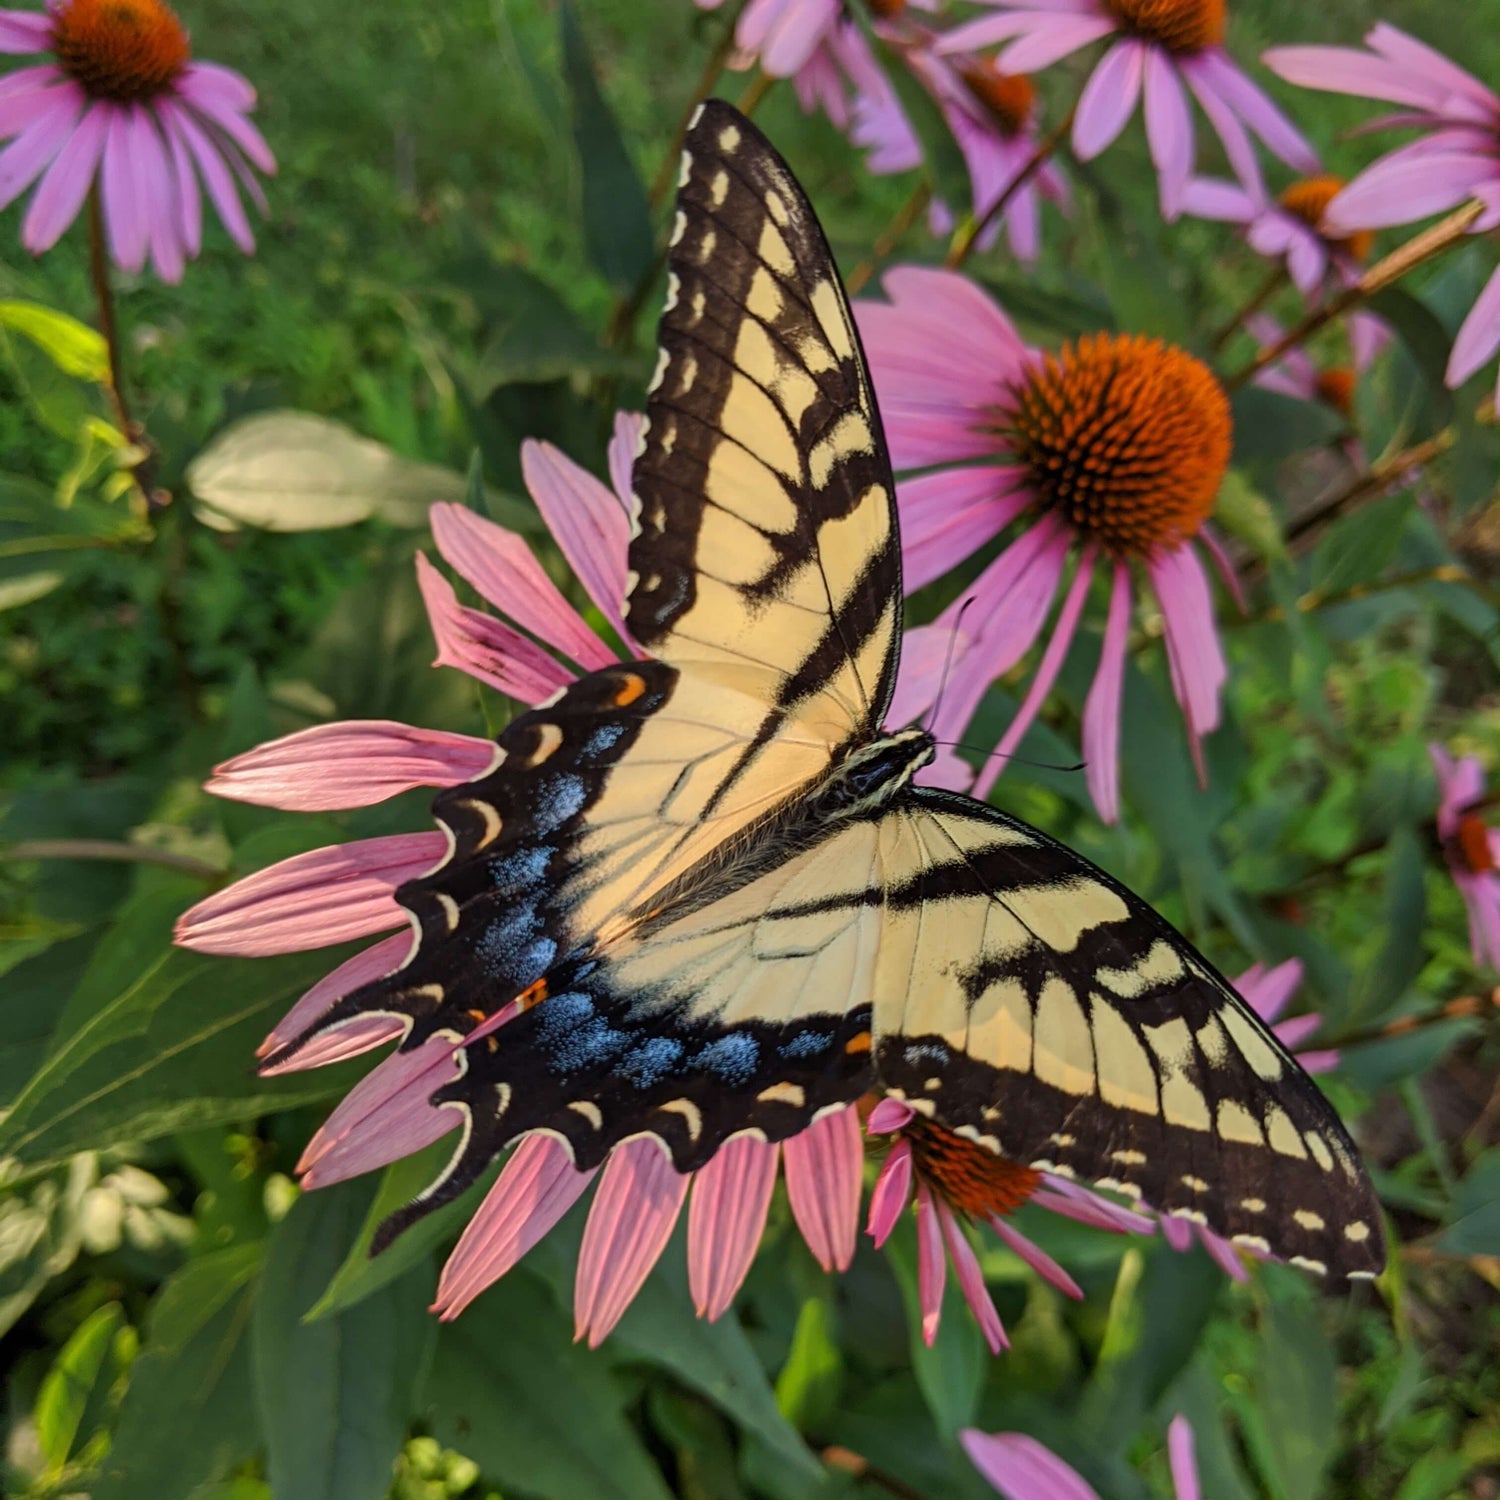 Vibrant hues of yellow, orange and blue on the wings of a tiger-swallowtail butterfly glow in the afternoon sun on pink echinacea flower.